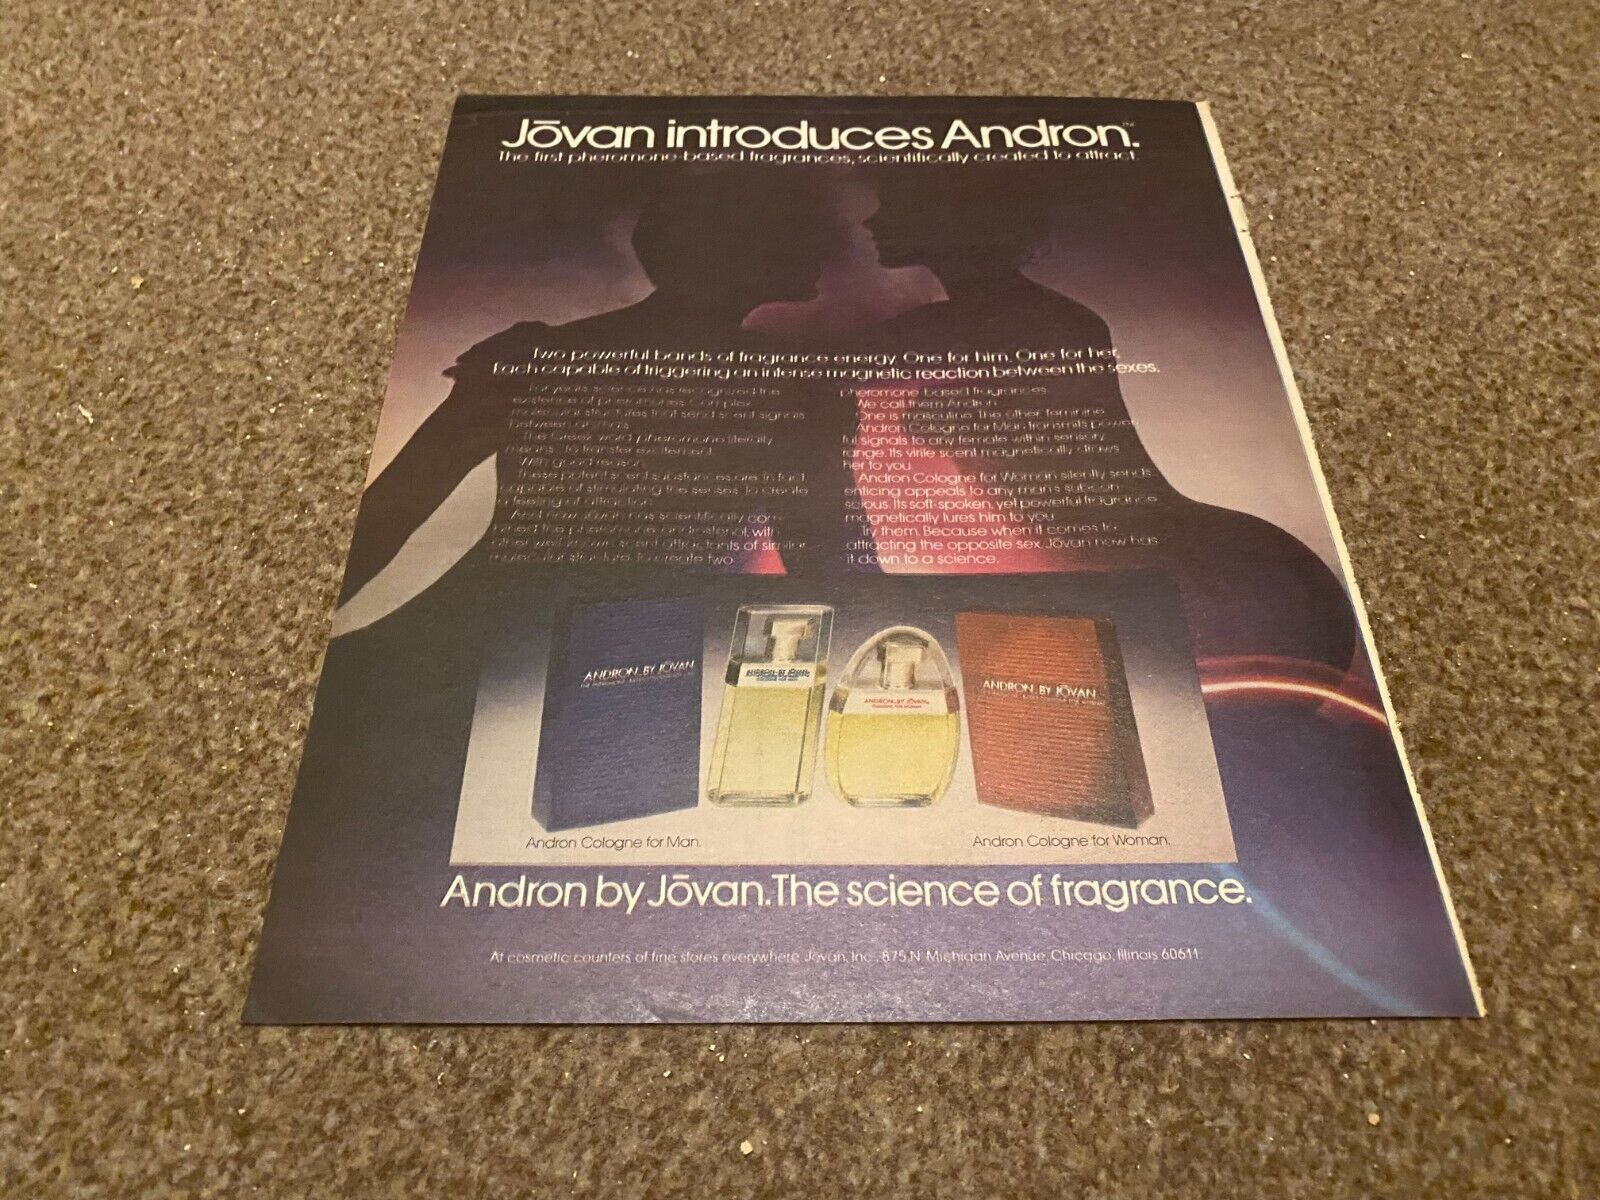 FRAMED ADVERT 13X11 ANDRON BY JOVAN FRAGRANCE